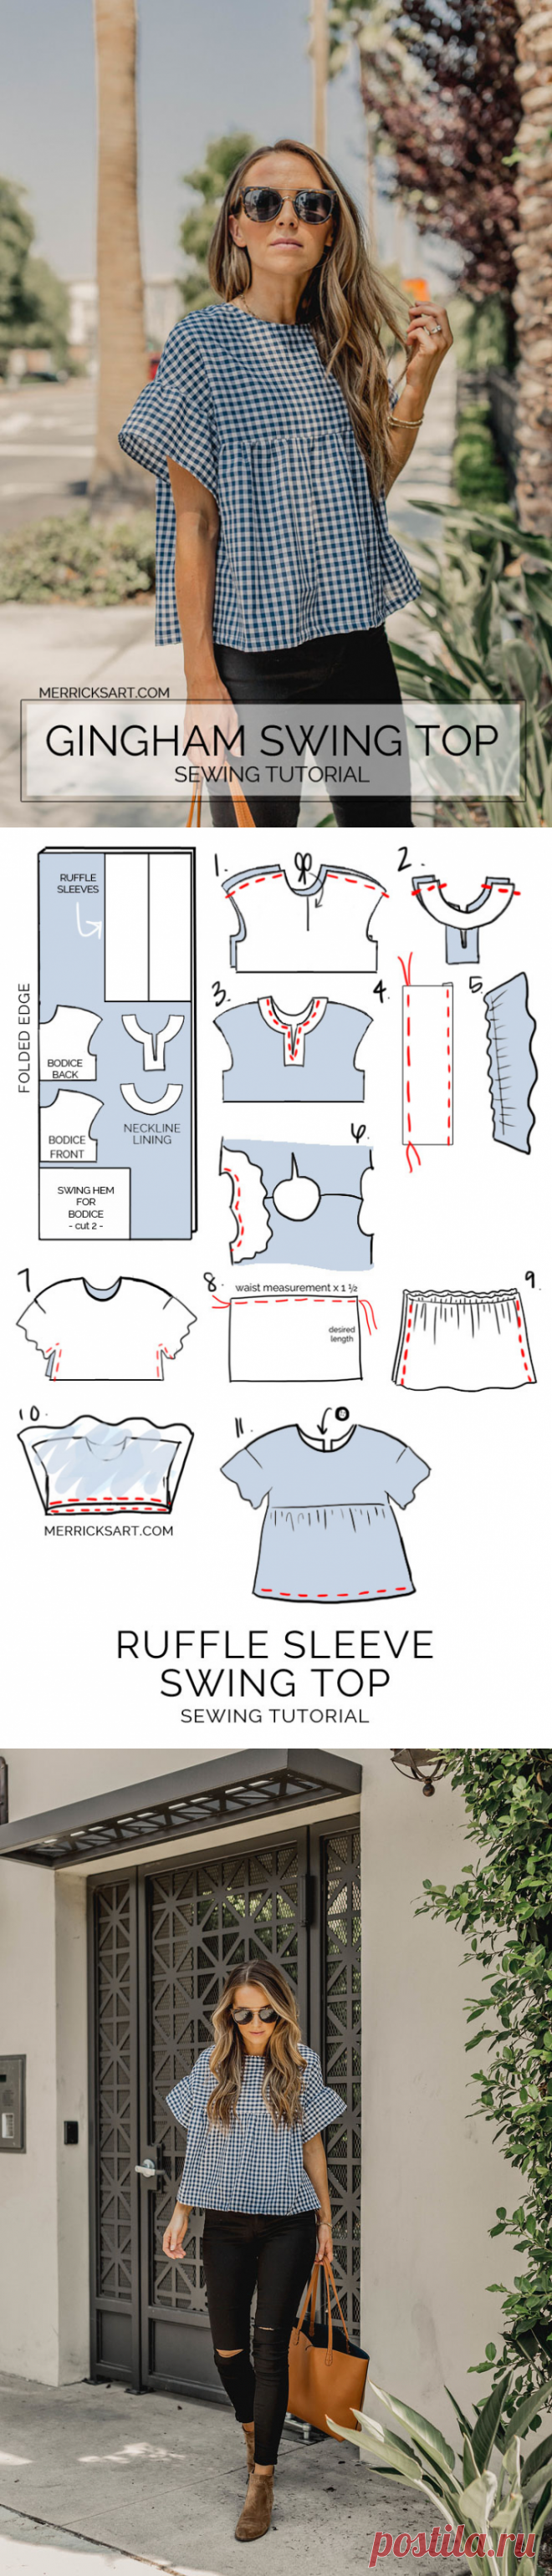 Merrick's Art // Style + Sewing for the Everyday GirlHow to Make a Gingham Ruffle Sleeve Top | Merrick's Art